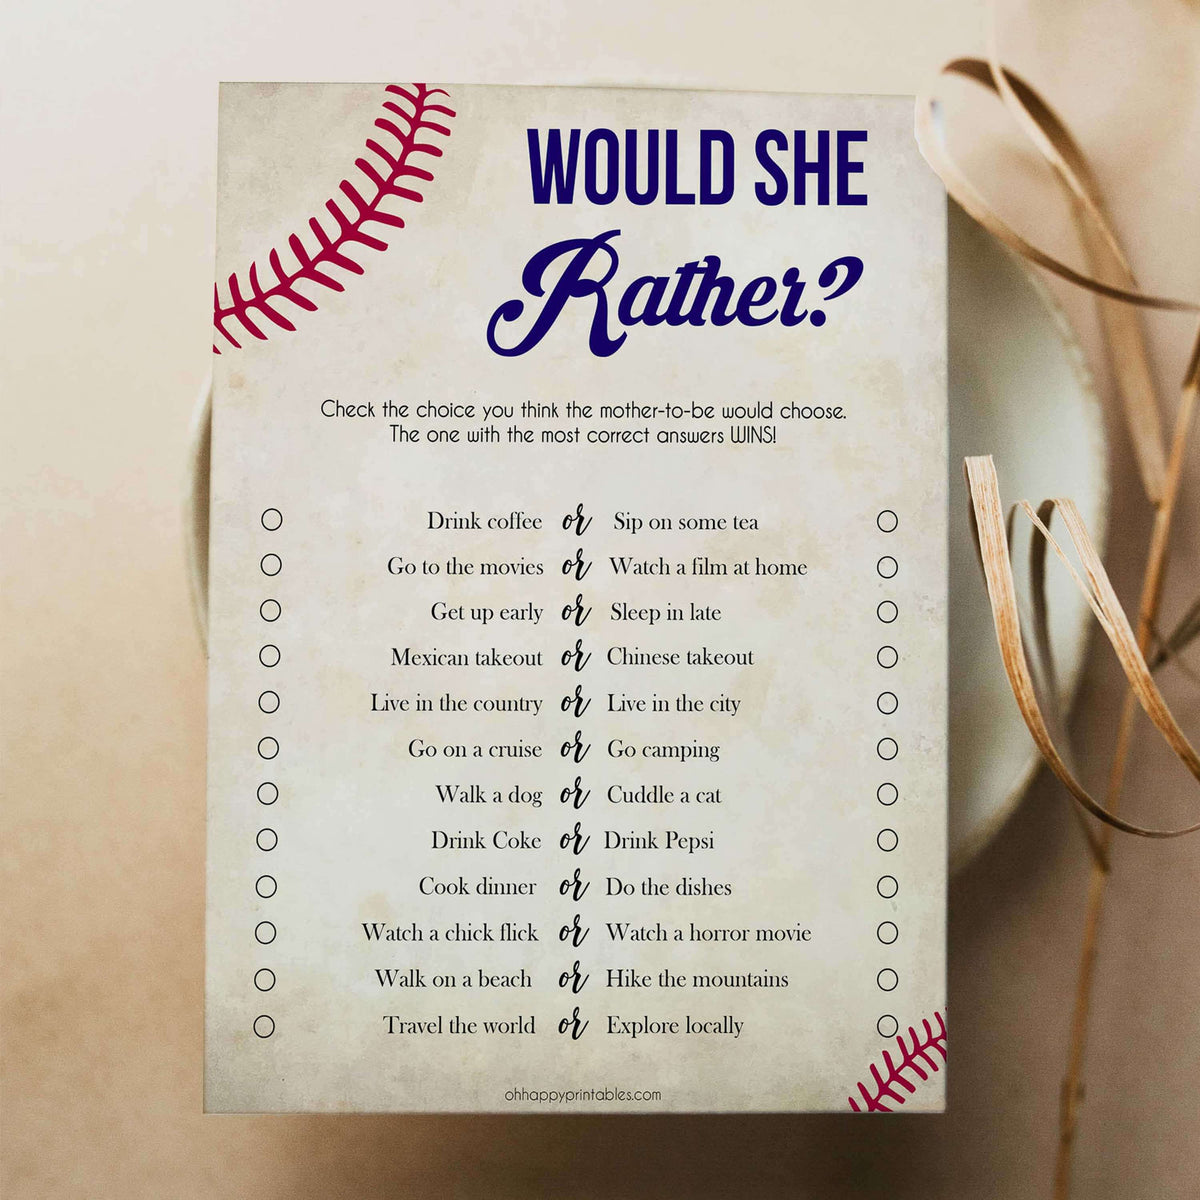 baby would she rather game, Baseball baby shower games, printable baby shower games, fun baby shower games, top baby shower ideas, little slugger baby games